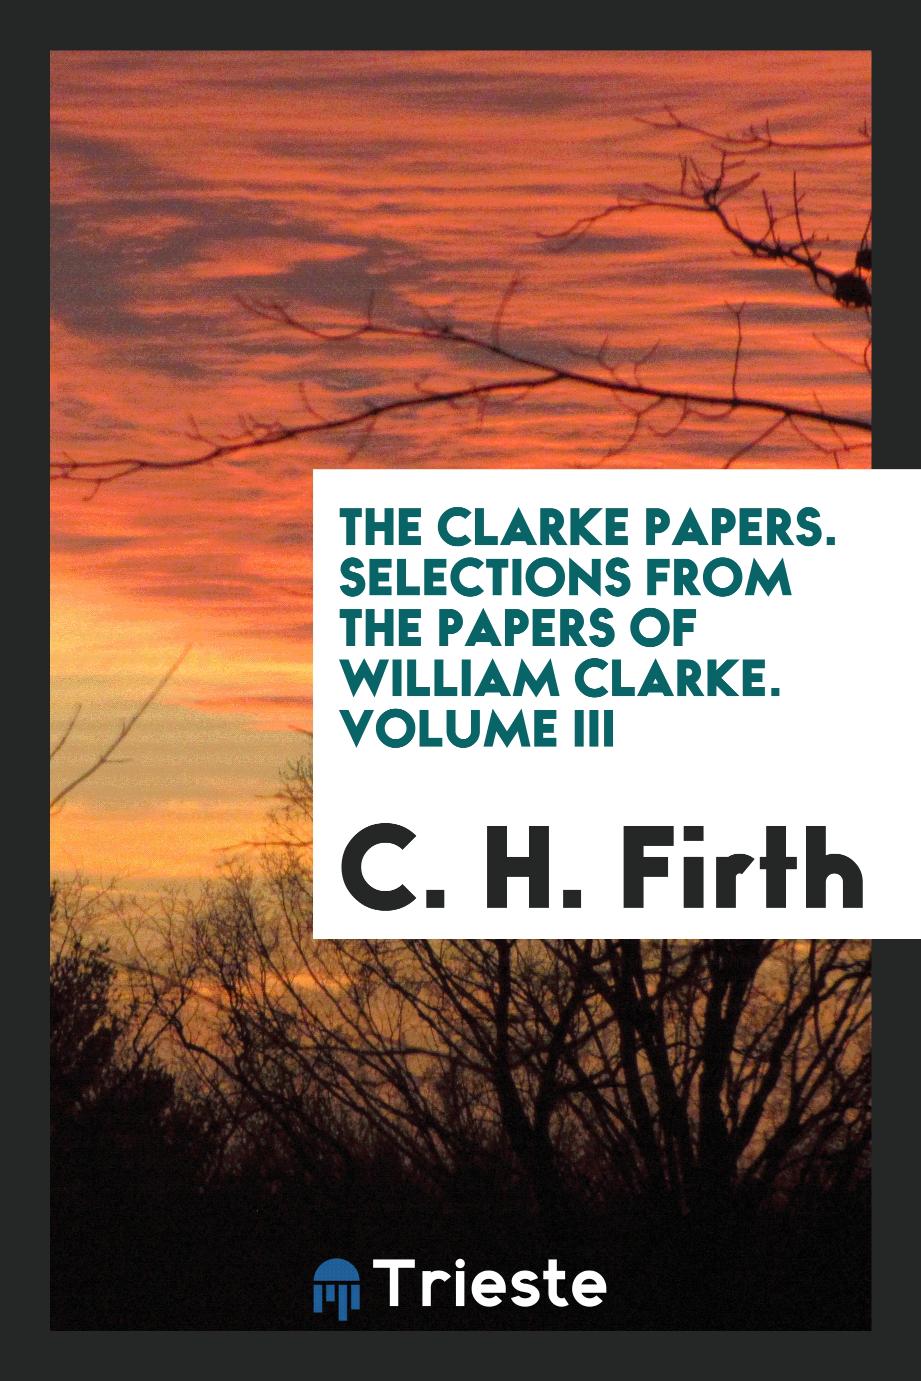 The Clarke Papers. Selections from the papers of William Clarke. Volume III